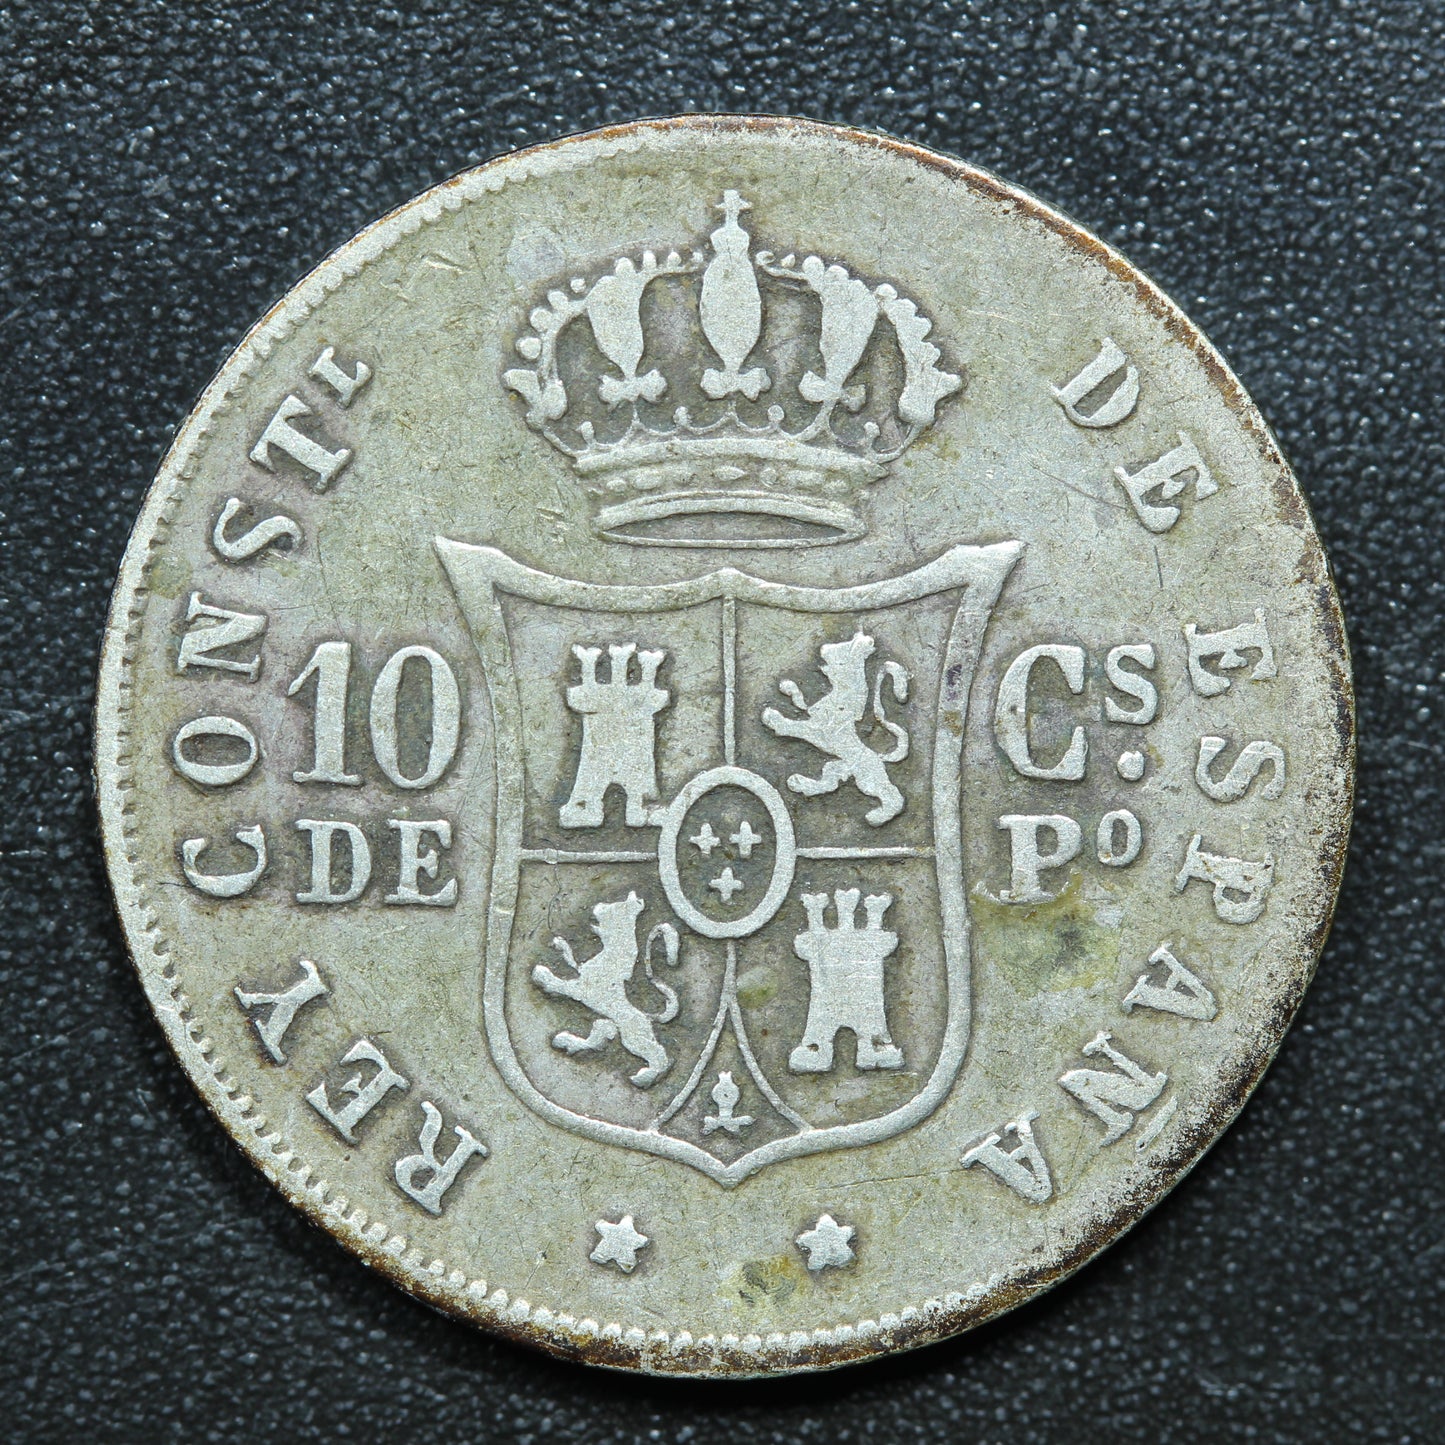 1881 10 Centimos Philippines Silver Coin - Alfonso XII - KM# 148